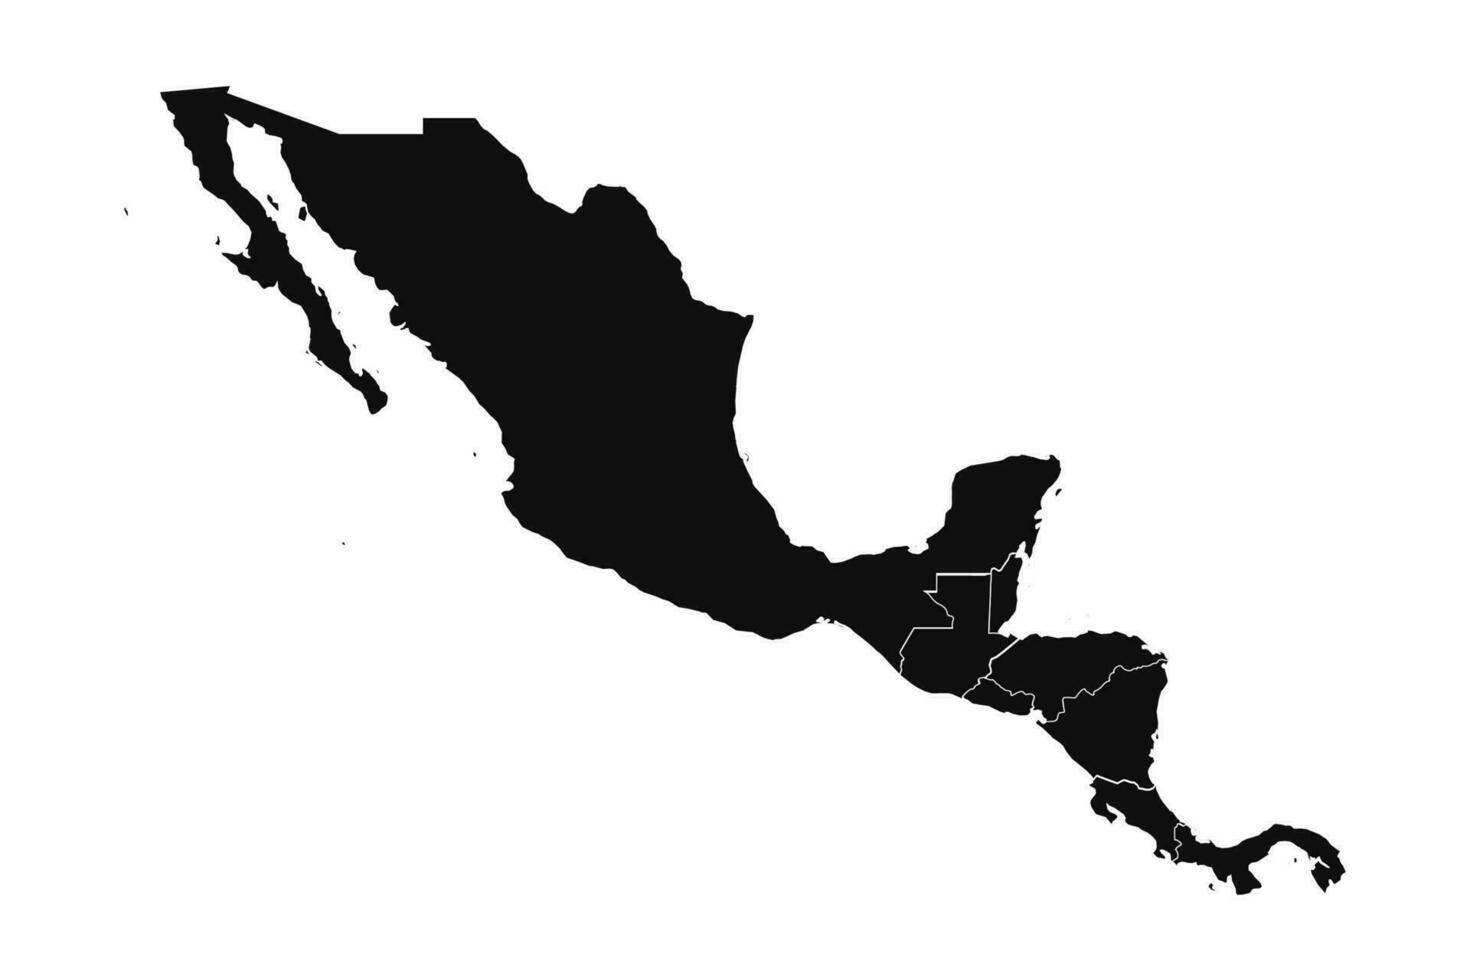 Abstract Central America Silhouette Detailed Map vector